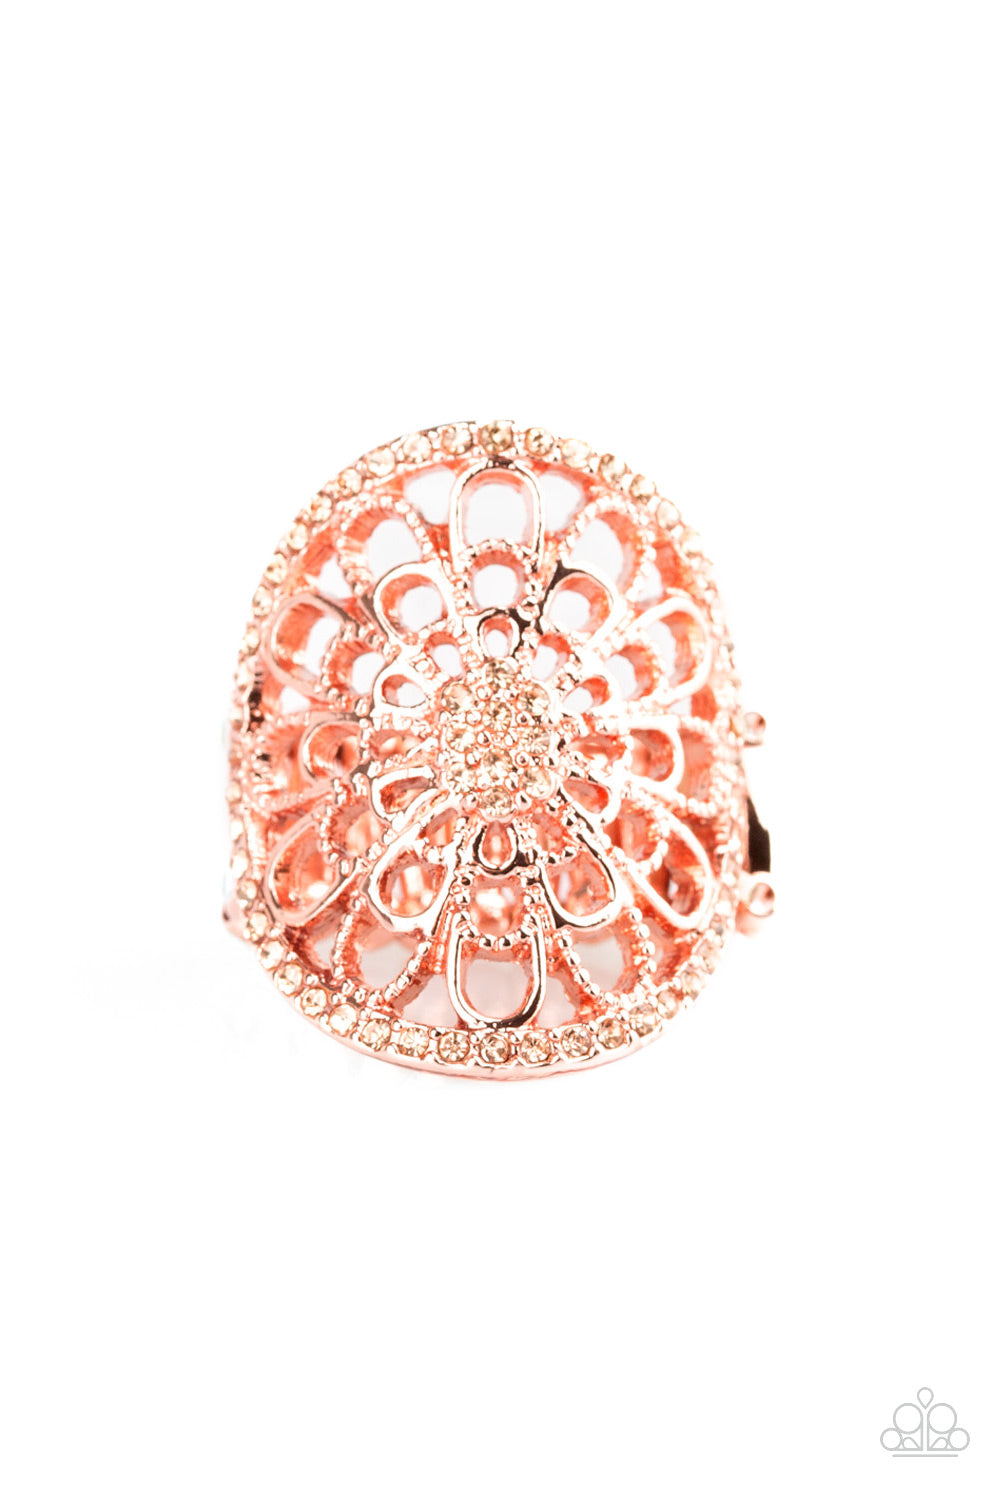 Springtime Shimmer Copper Paparazzi Rings Cashmere Pink Jewels - Cashmere Pink Jewels & Accessories, Cashmere Pink Jewels & Accessories - Paparazzi